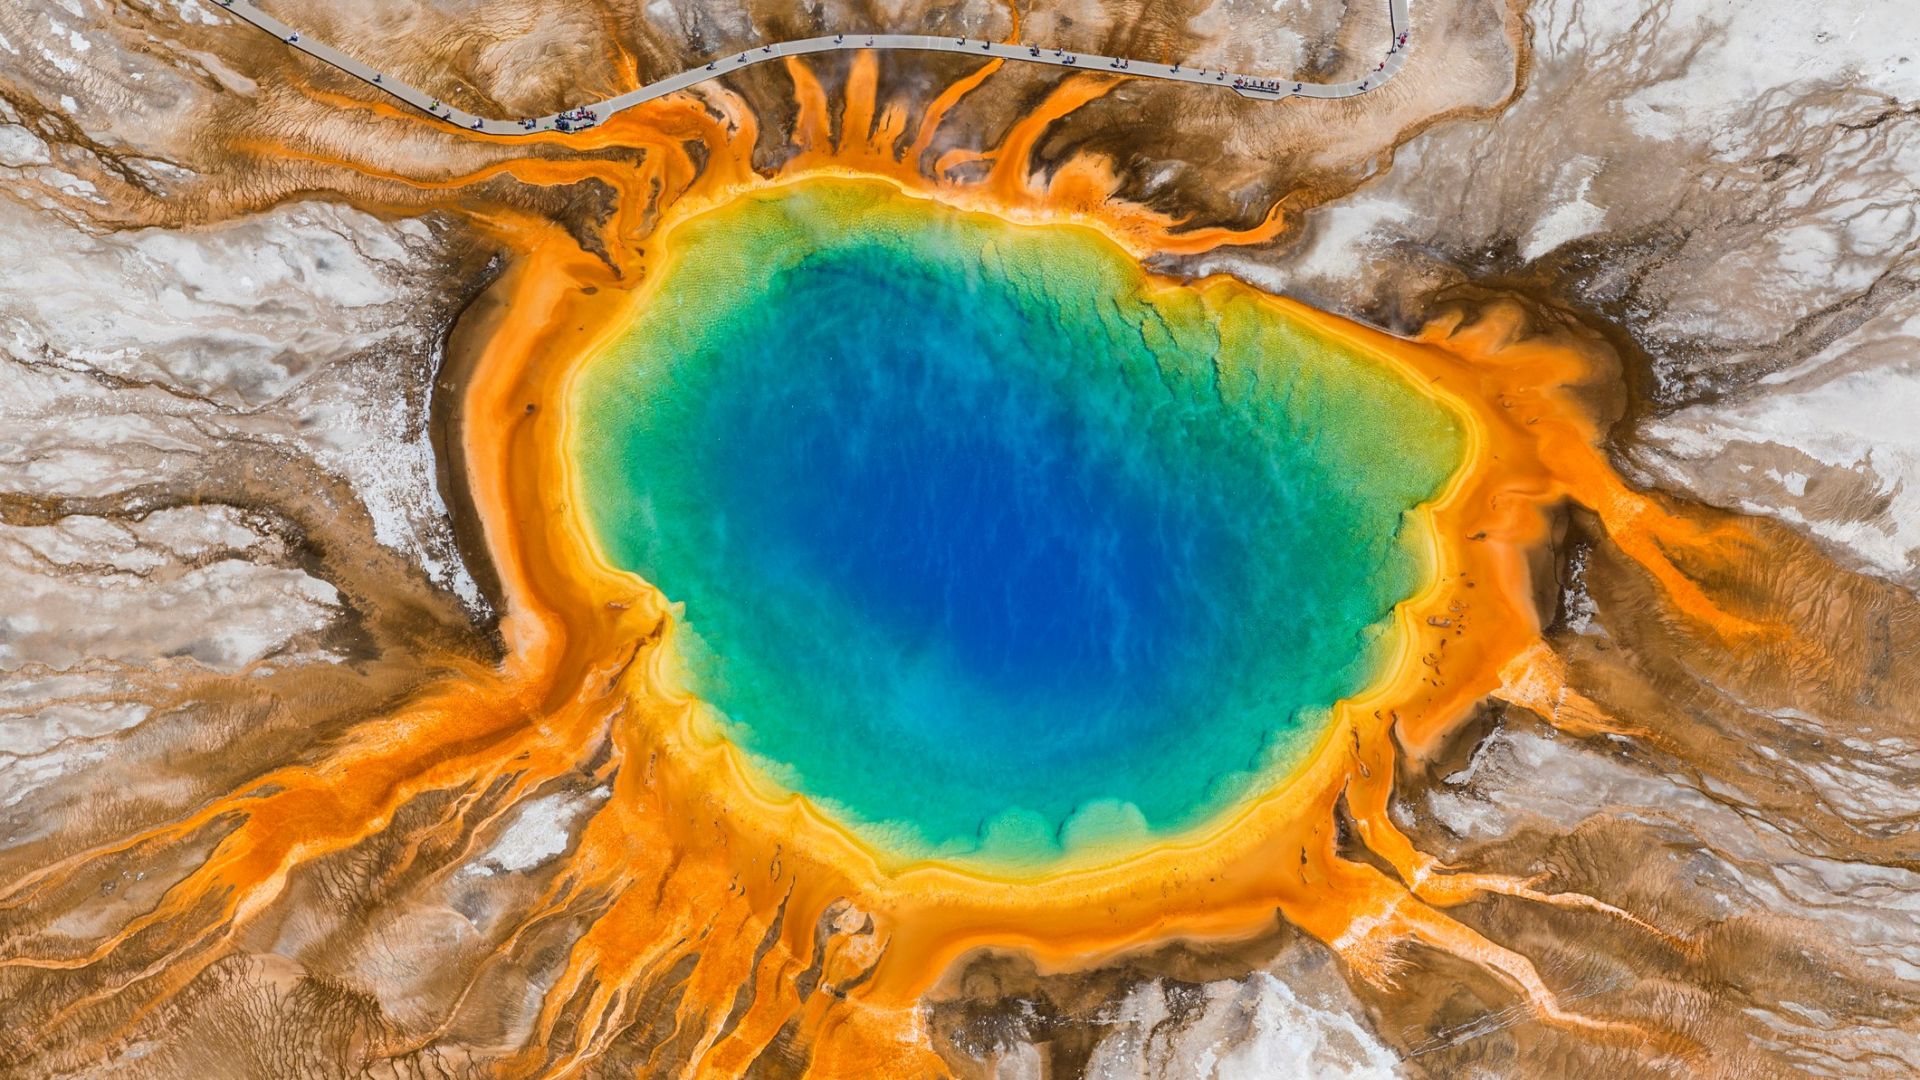 <p>                     The Grand Prismatic Spring is the most photographed thermal feature in Yellowstone National Park, according to adventure publisher Outside.                   </p>                                      <p>                     According to the U.S. National Park Service, the ring of vivid colors measures 200 to 300 feet (60 to 90 meters) in diameter and 121 feet (36 m) deep — it's no wonder this striking spring is so popular with photographers and tourists alike.                    </p>                                      <p>                     The superheated spring is also a sought-after location for microscopic organisms known as thermophiles, which thrive in hot environments. ("Thermo" means heat, and "phile" means lover.) The hardiest of the thermophiles that live in the hottest water are colorless or yellow, whereas the orange, brown and green thermophiles live in the not-so-hot waters around the edge of the spring.                   </p>